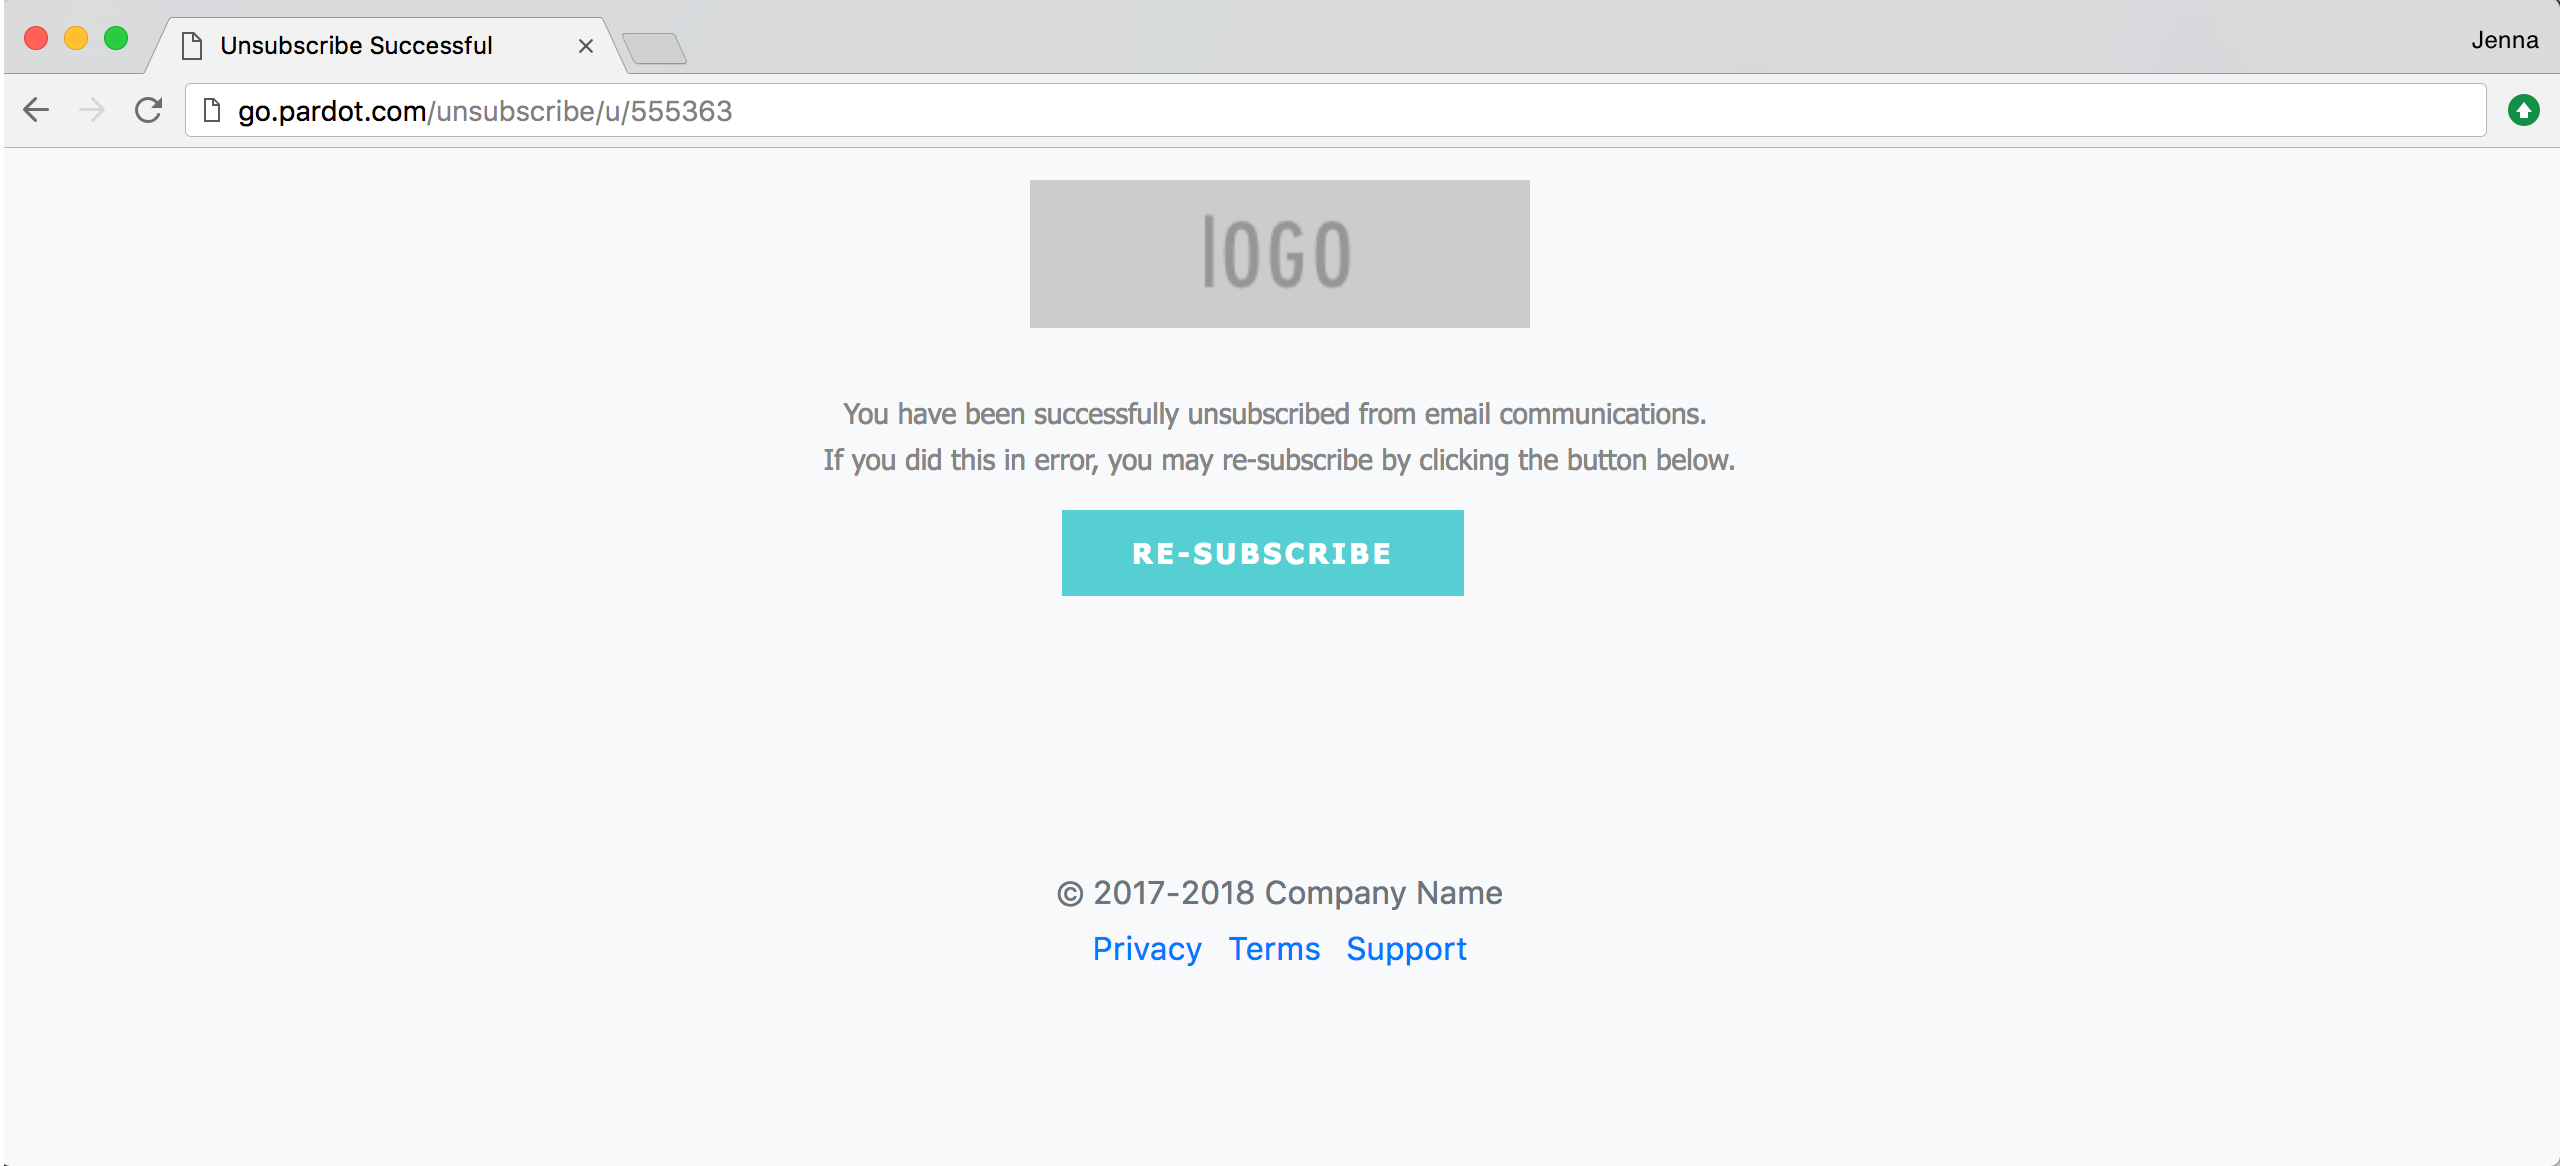 Step 3: Edit the unsubscribe page.